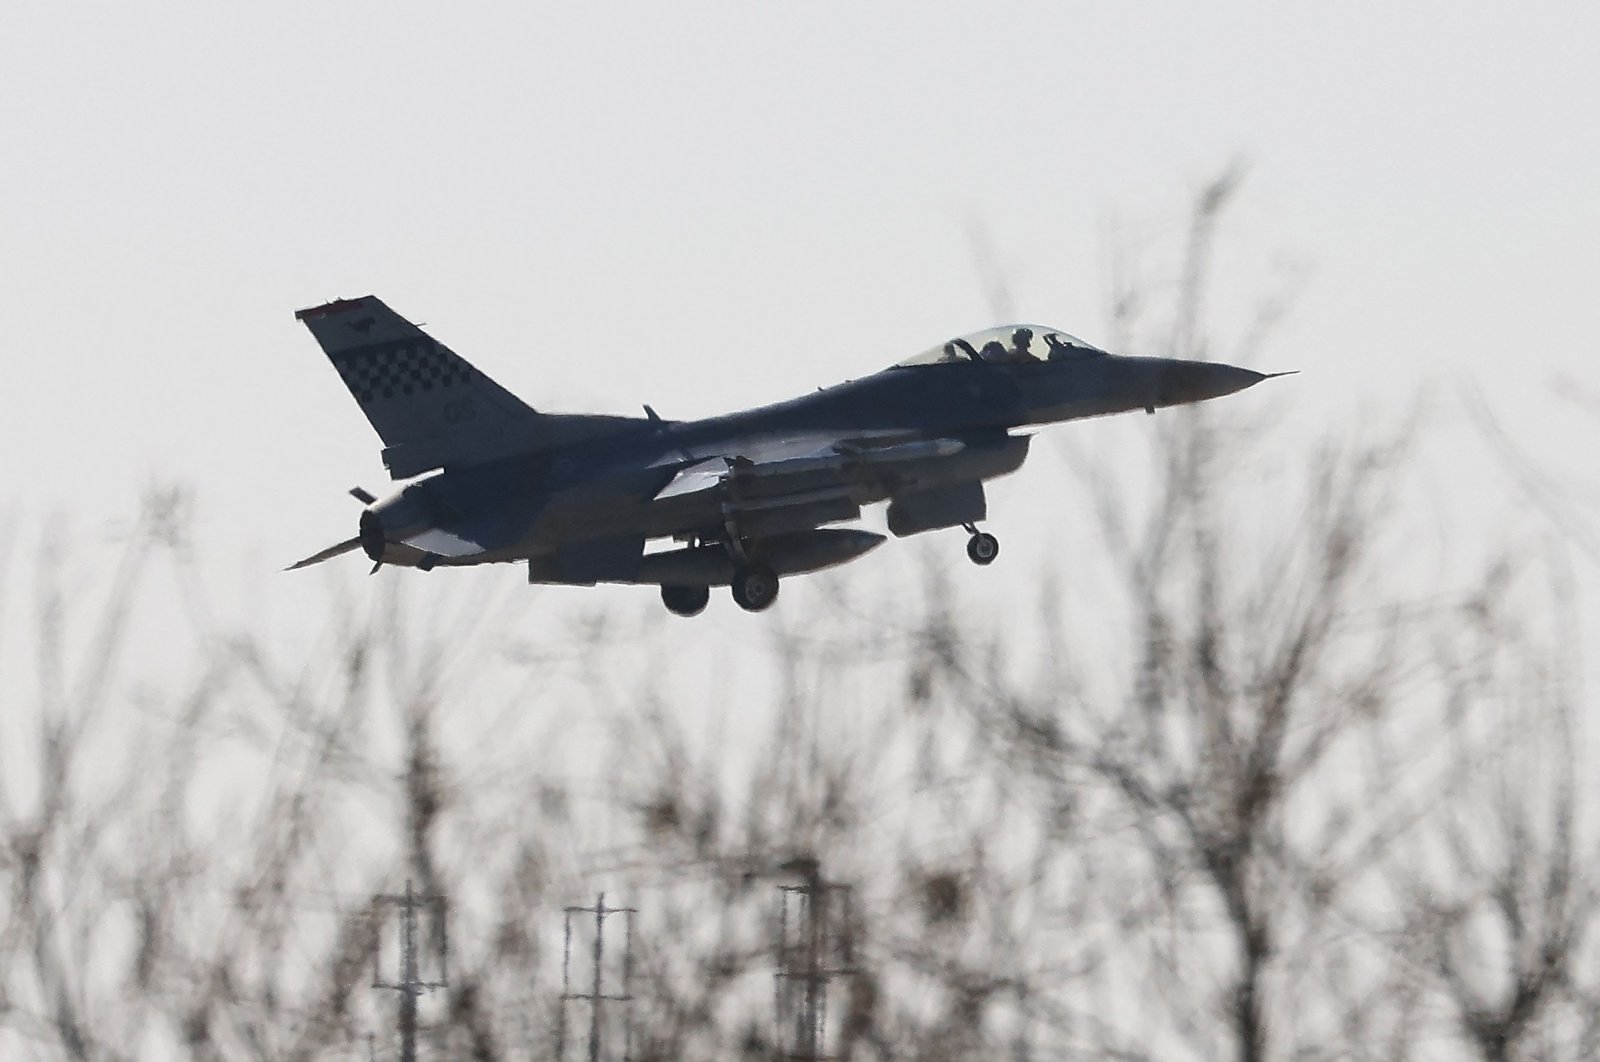 A U.S. Air Force F-16 fighter jet is seen at the Osan Air Base in Pyeongtaek, South Korea, Nov. 4, 2022. (AFP Photo)